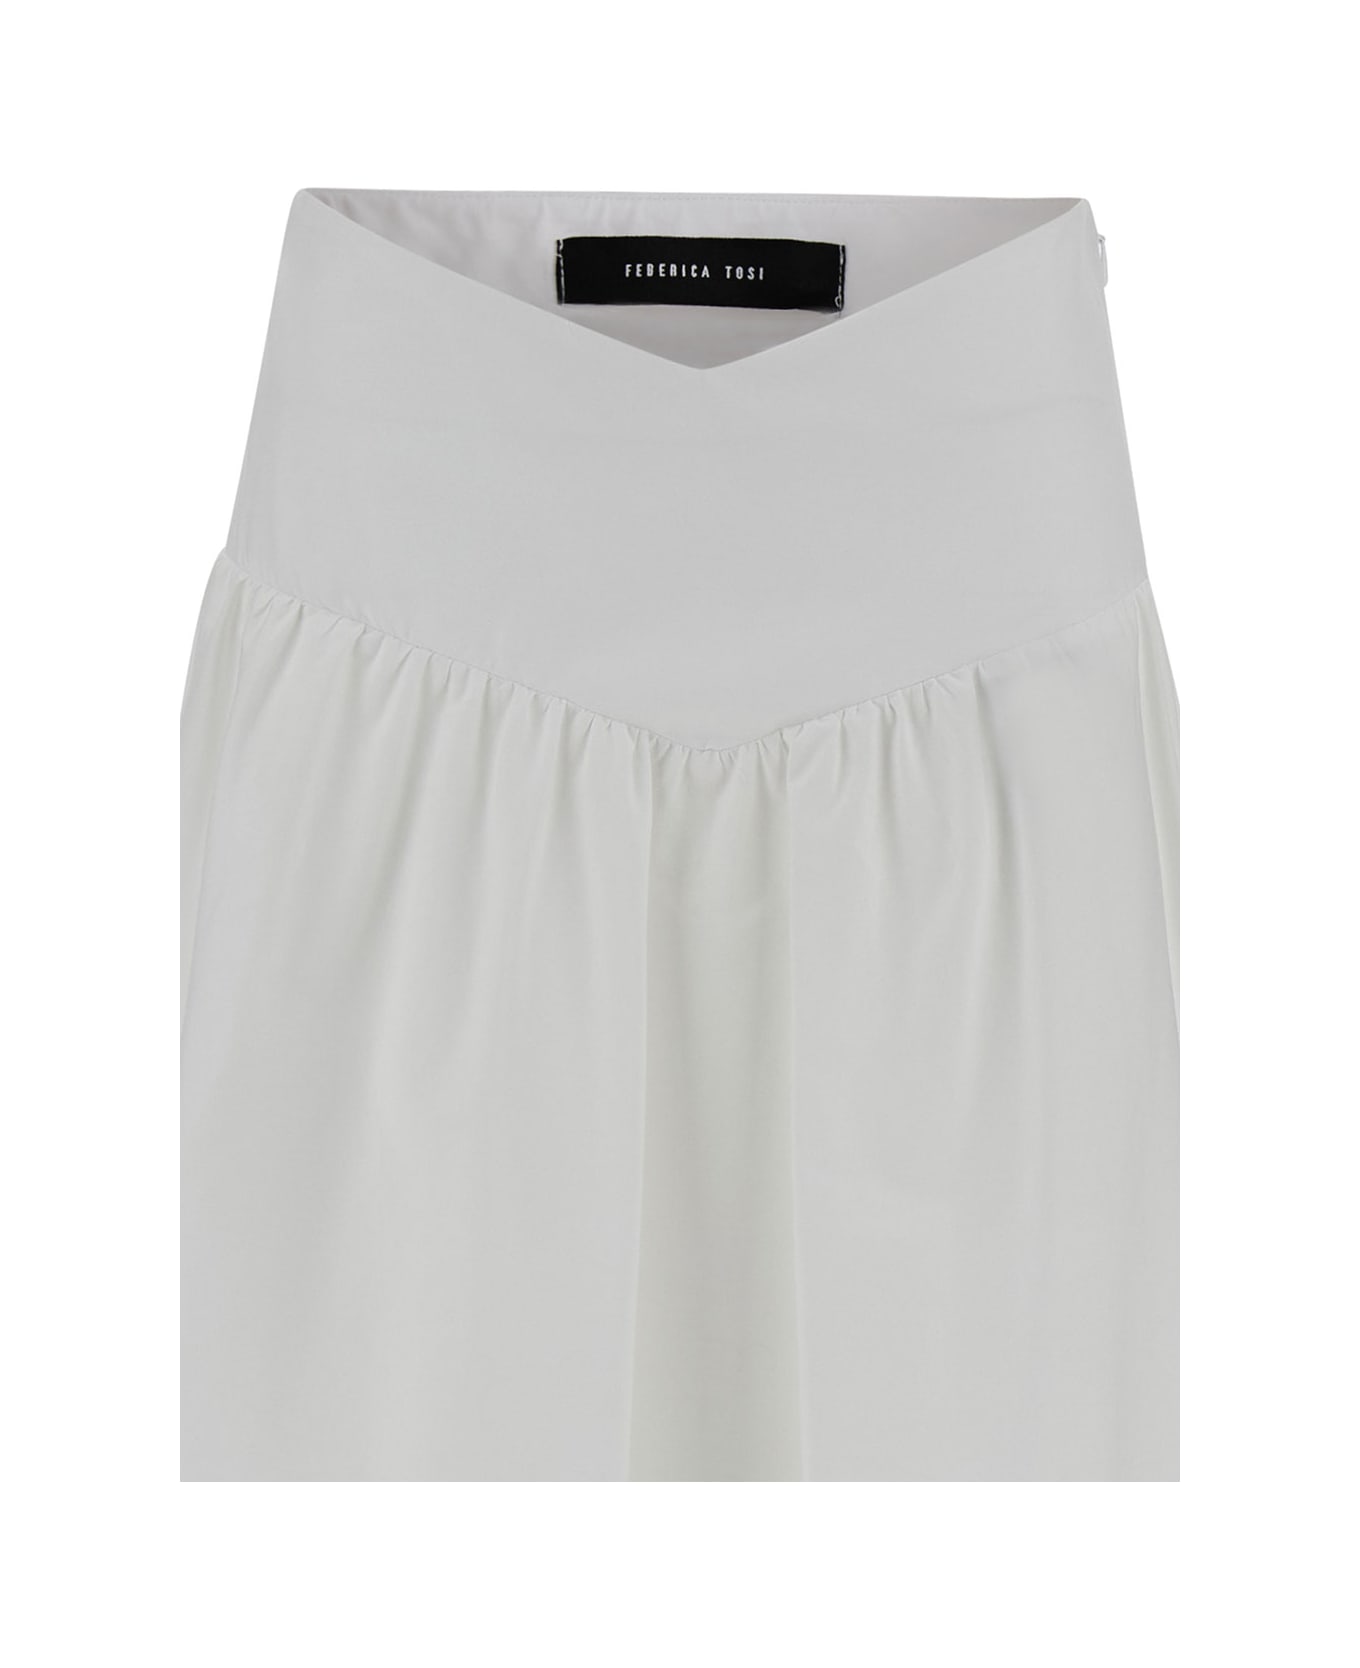 Federica Tosi Long White Pleated Skirt In Stretch Cotton Woman - White スカート